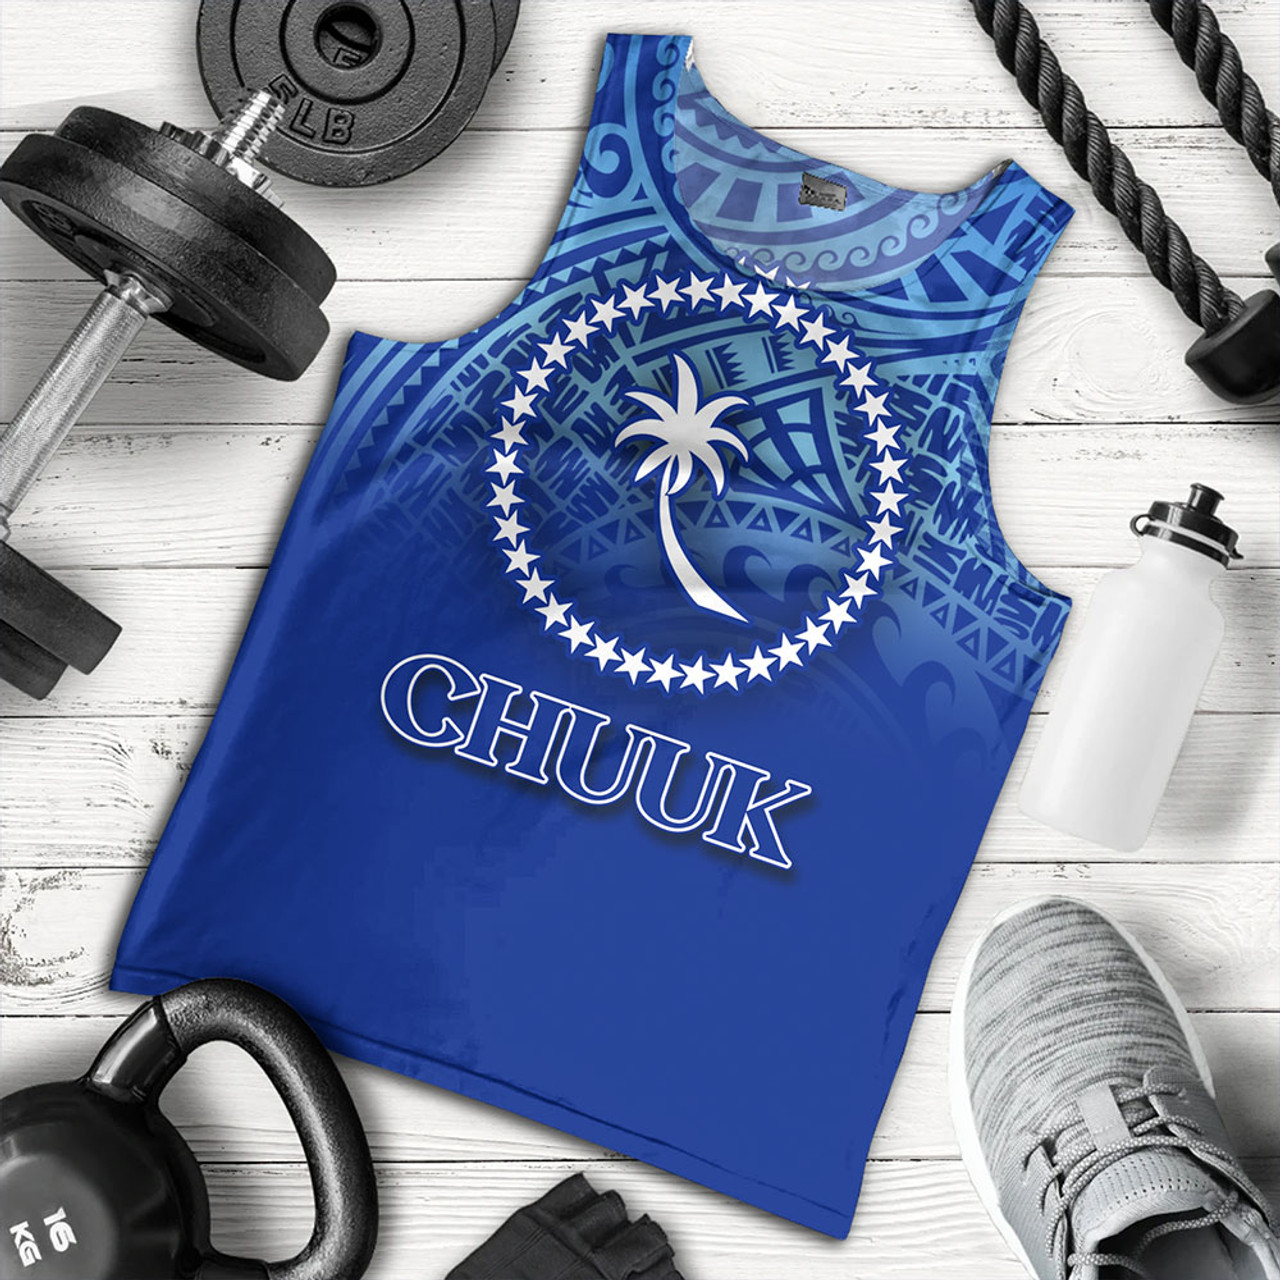 Chuuk State Tank Top Flag Color With Traditional Patterns